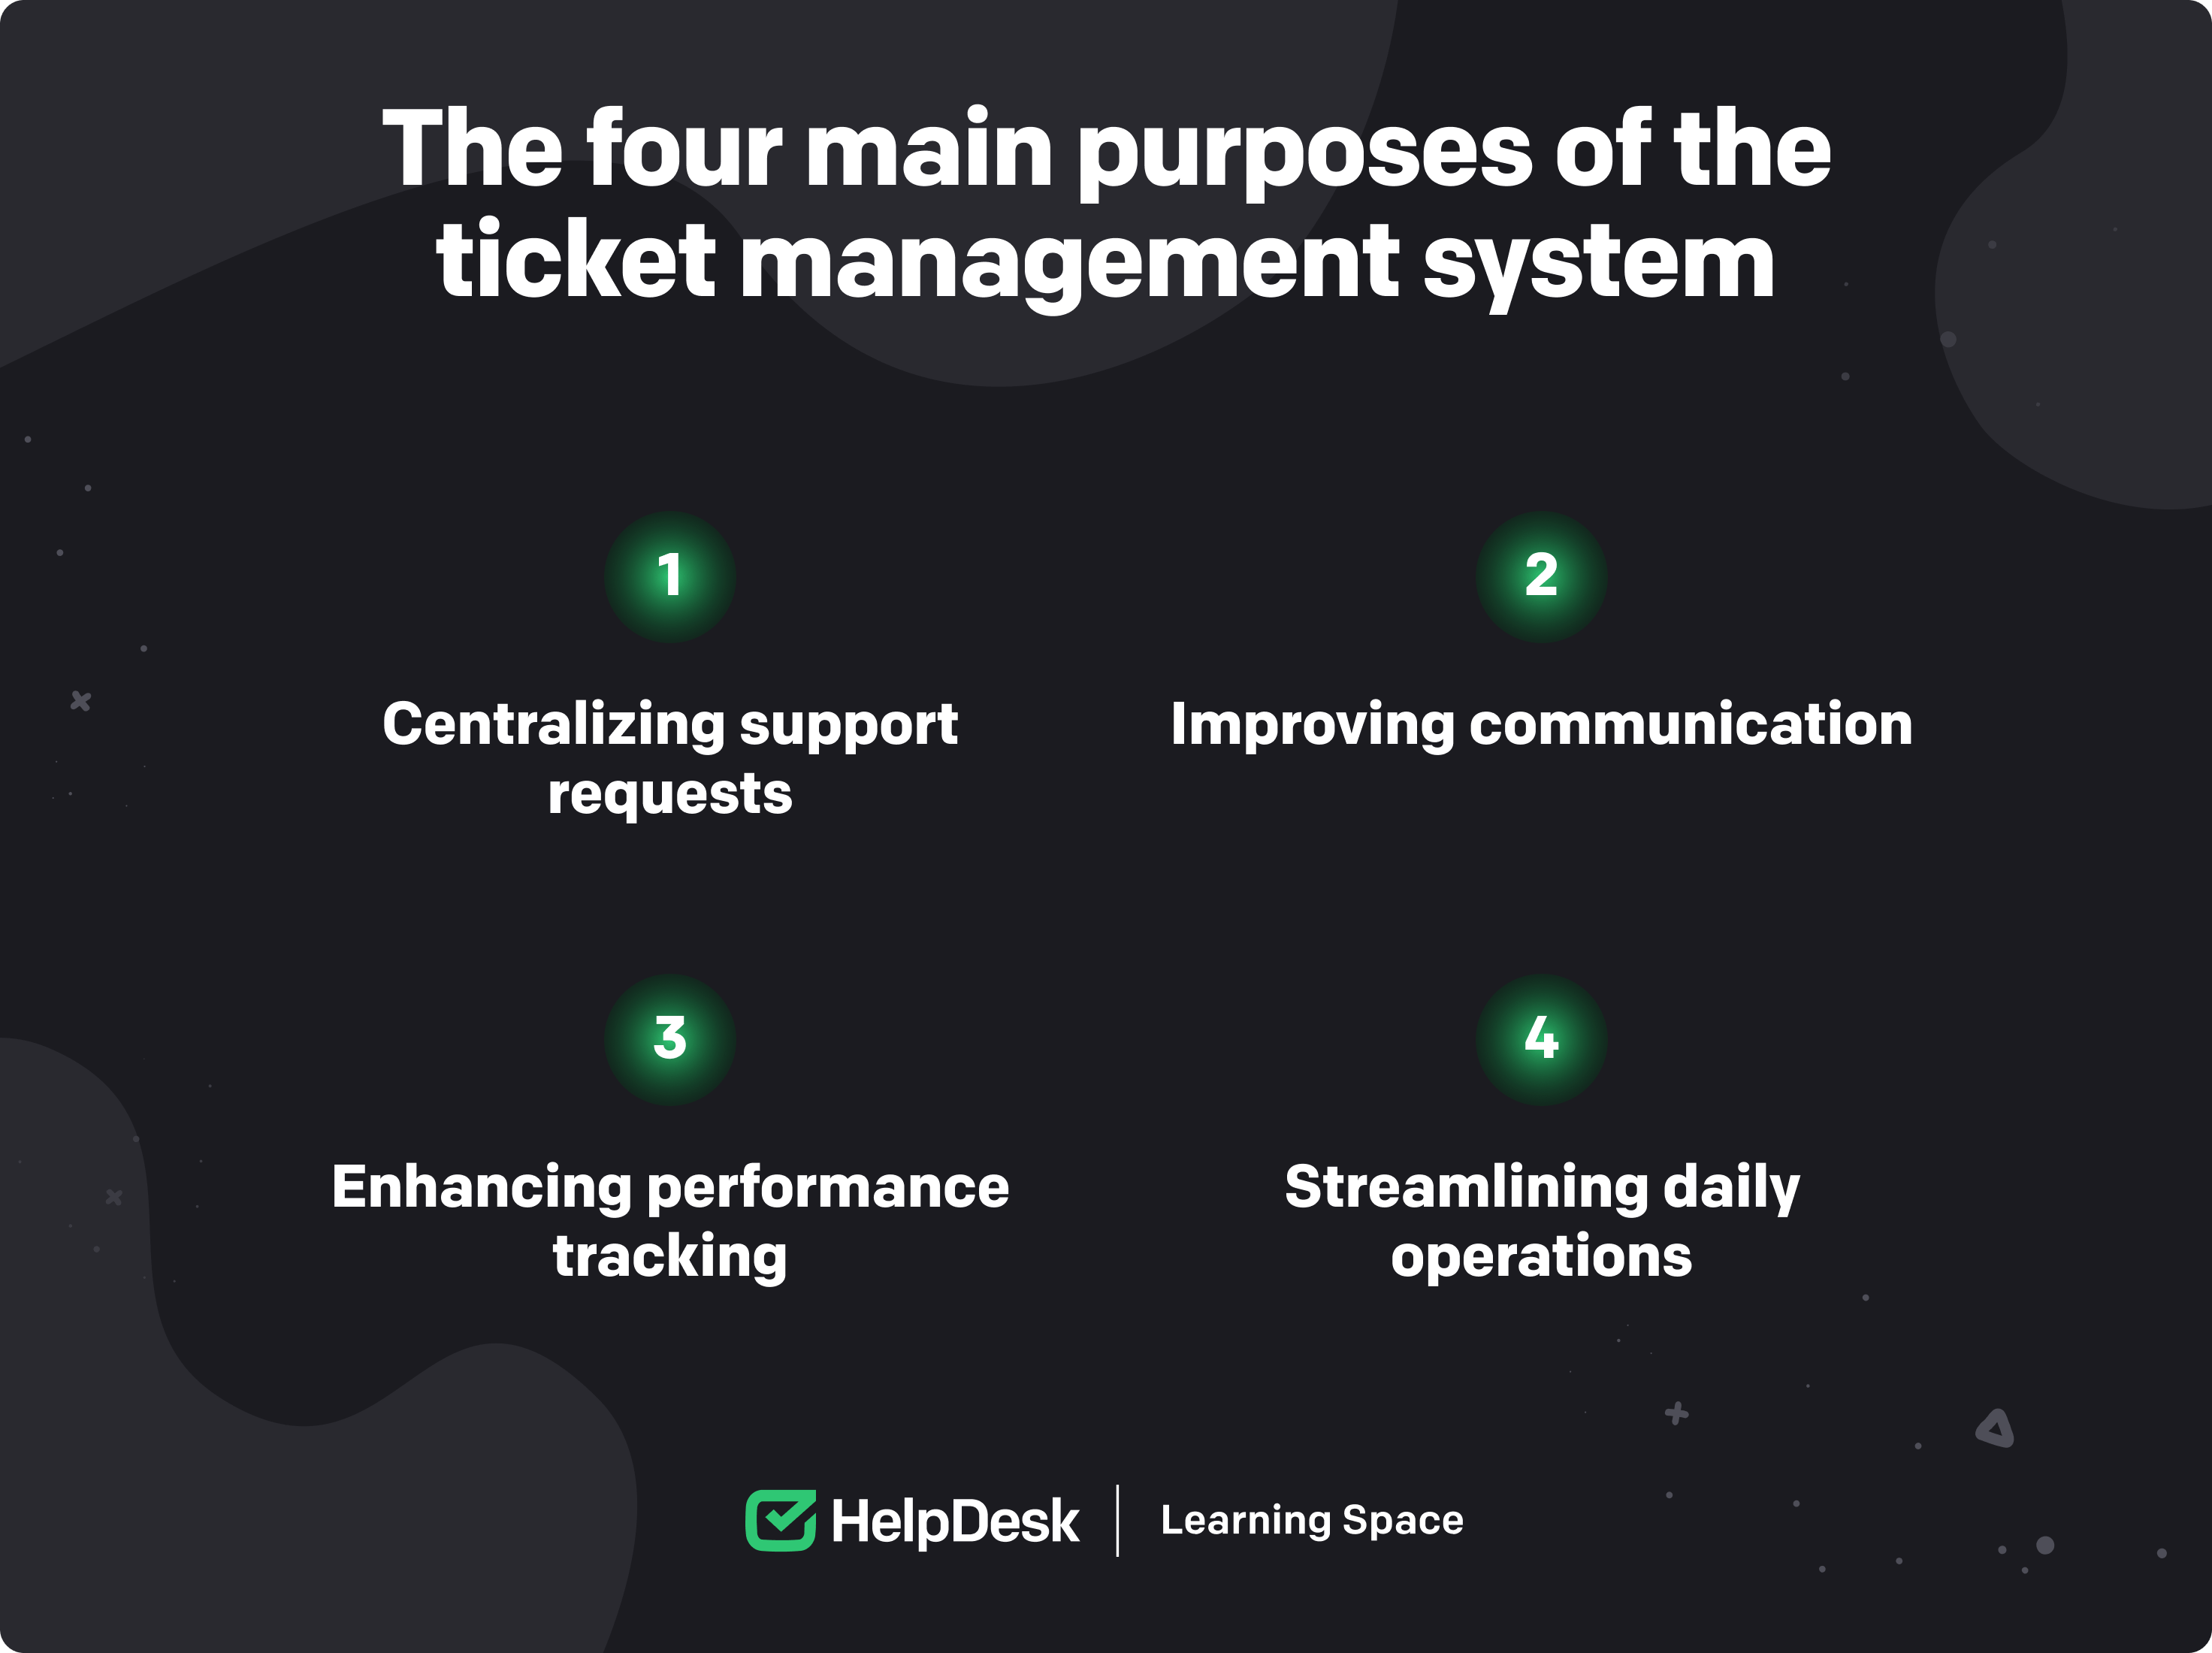 The four main purposes of the ticket management system